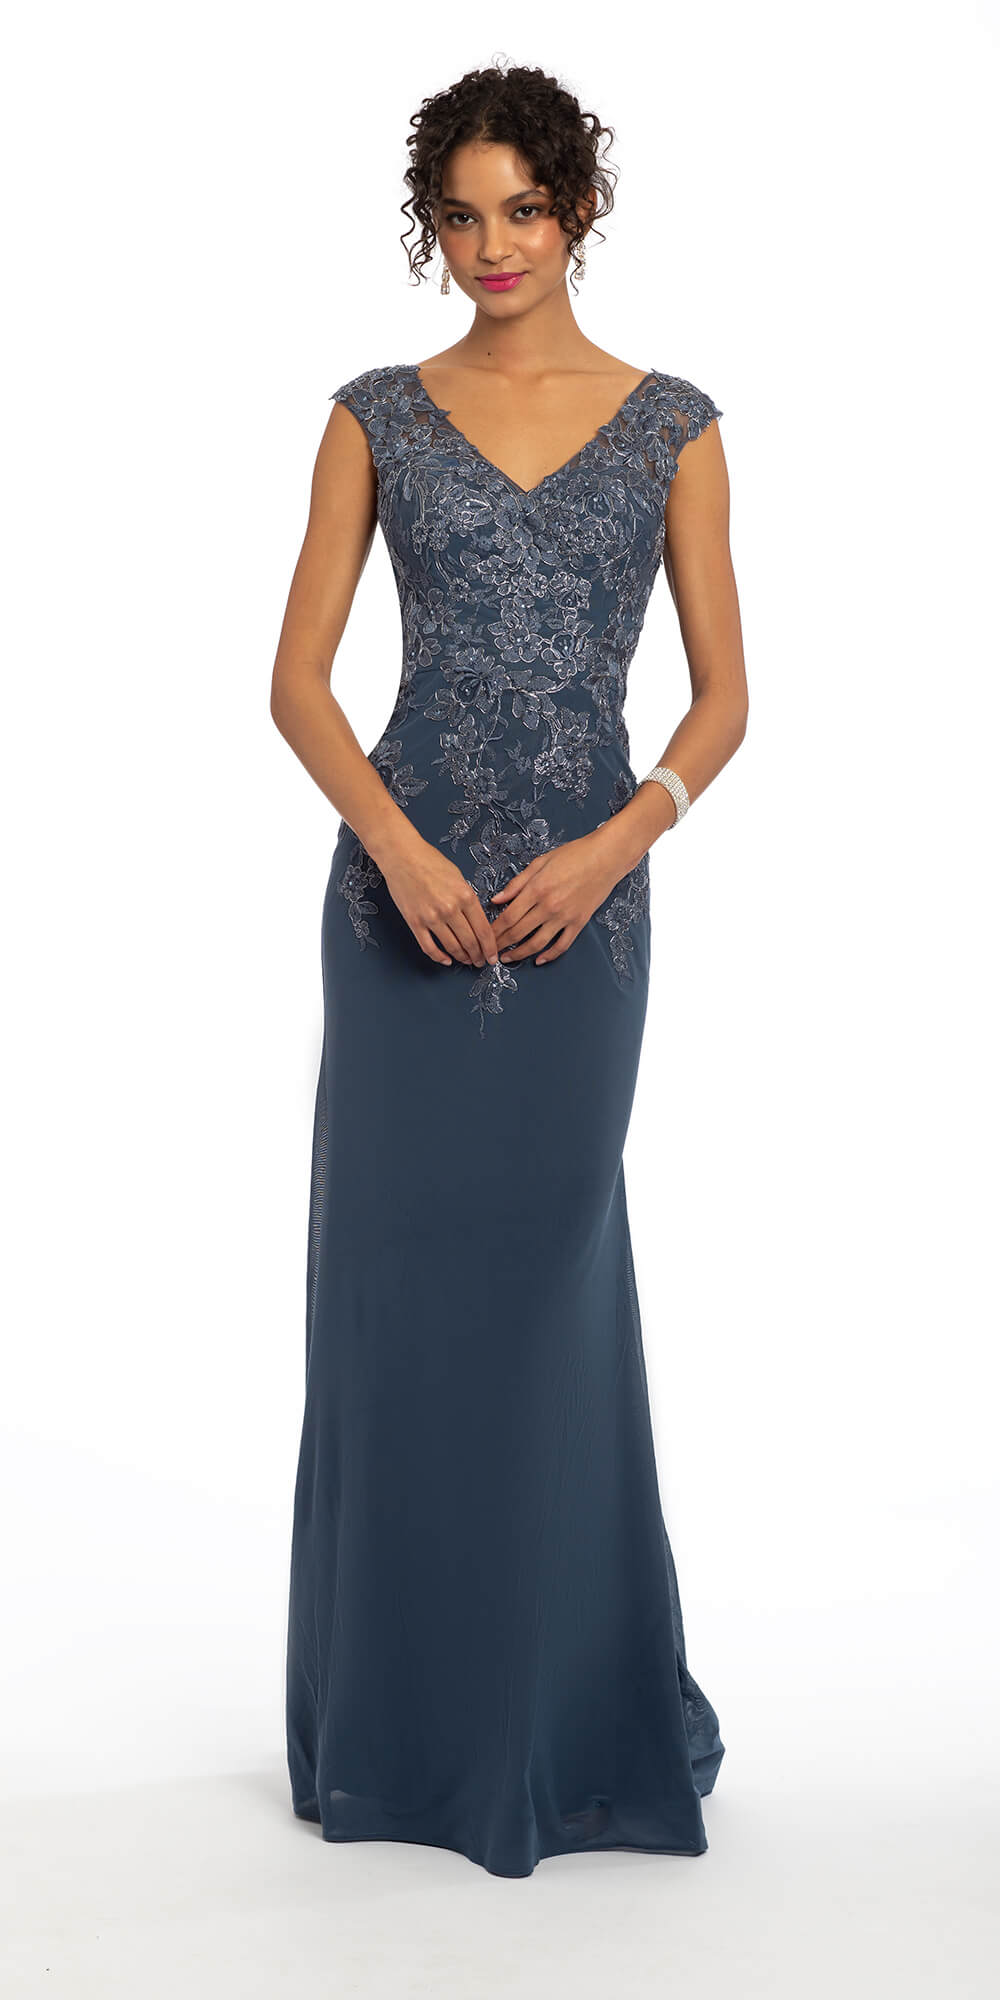 Embroidered Evening Dresses